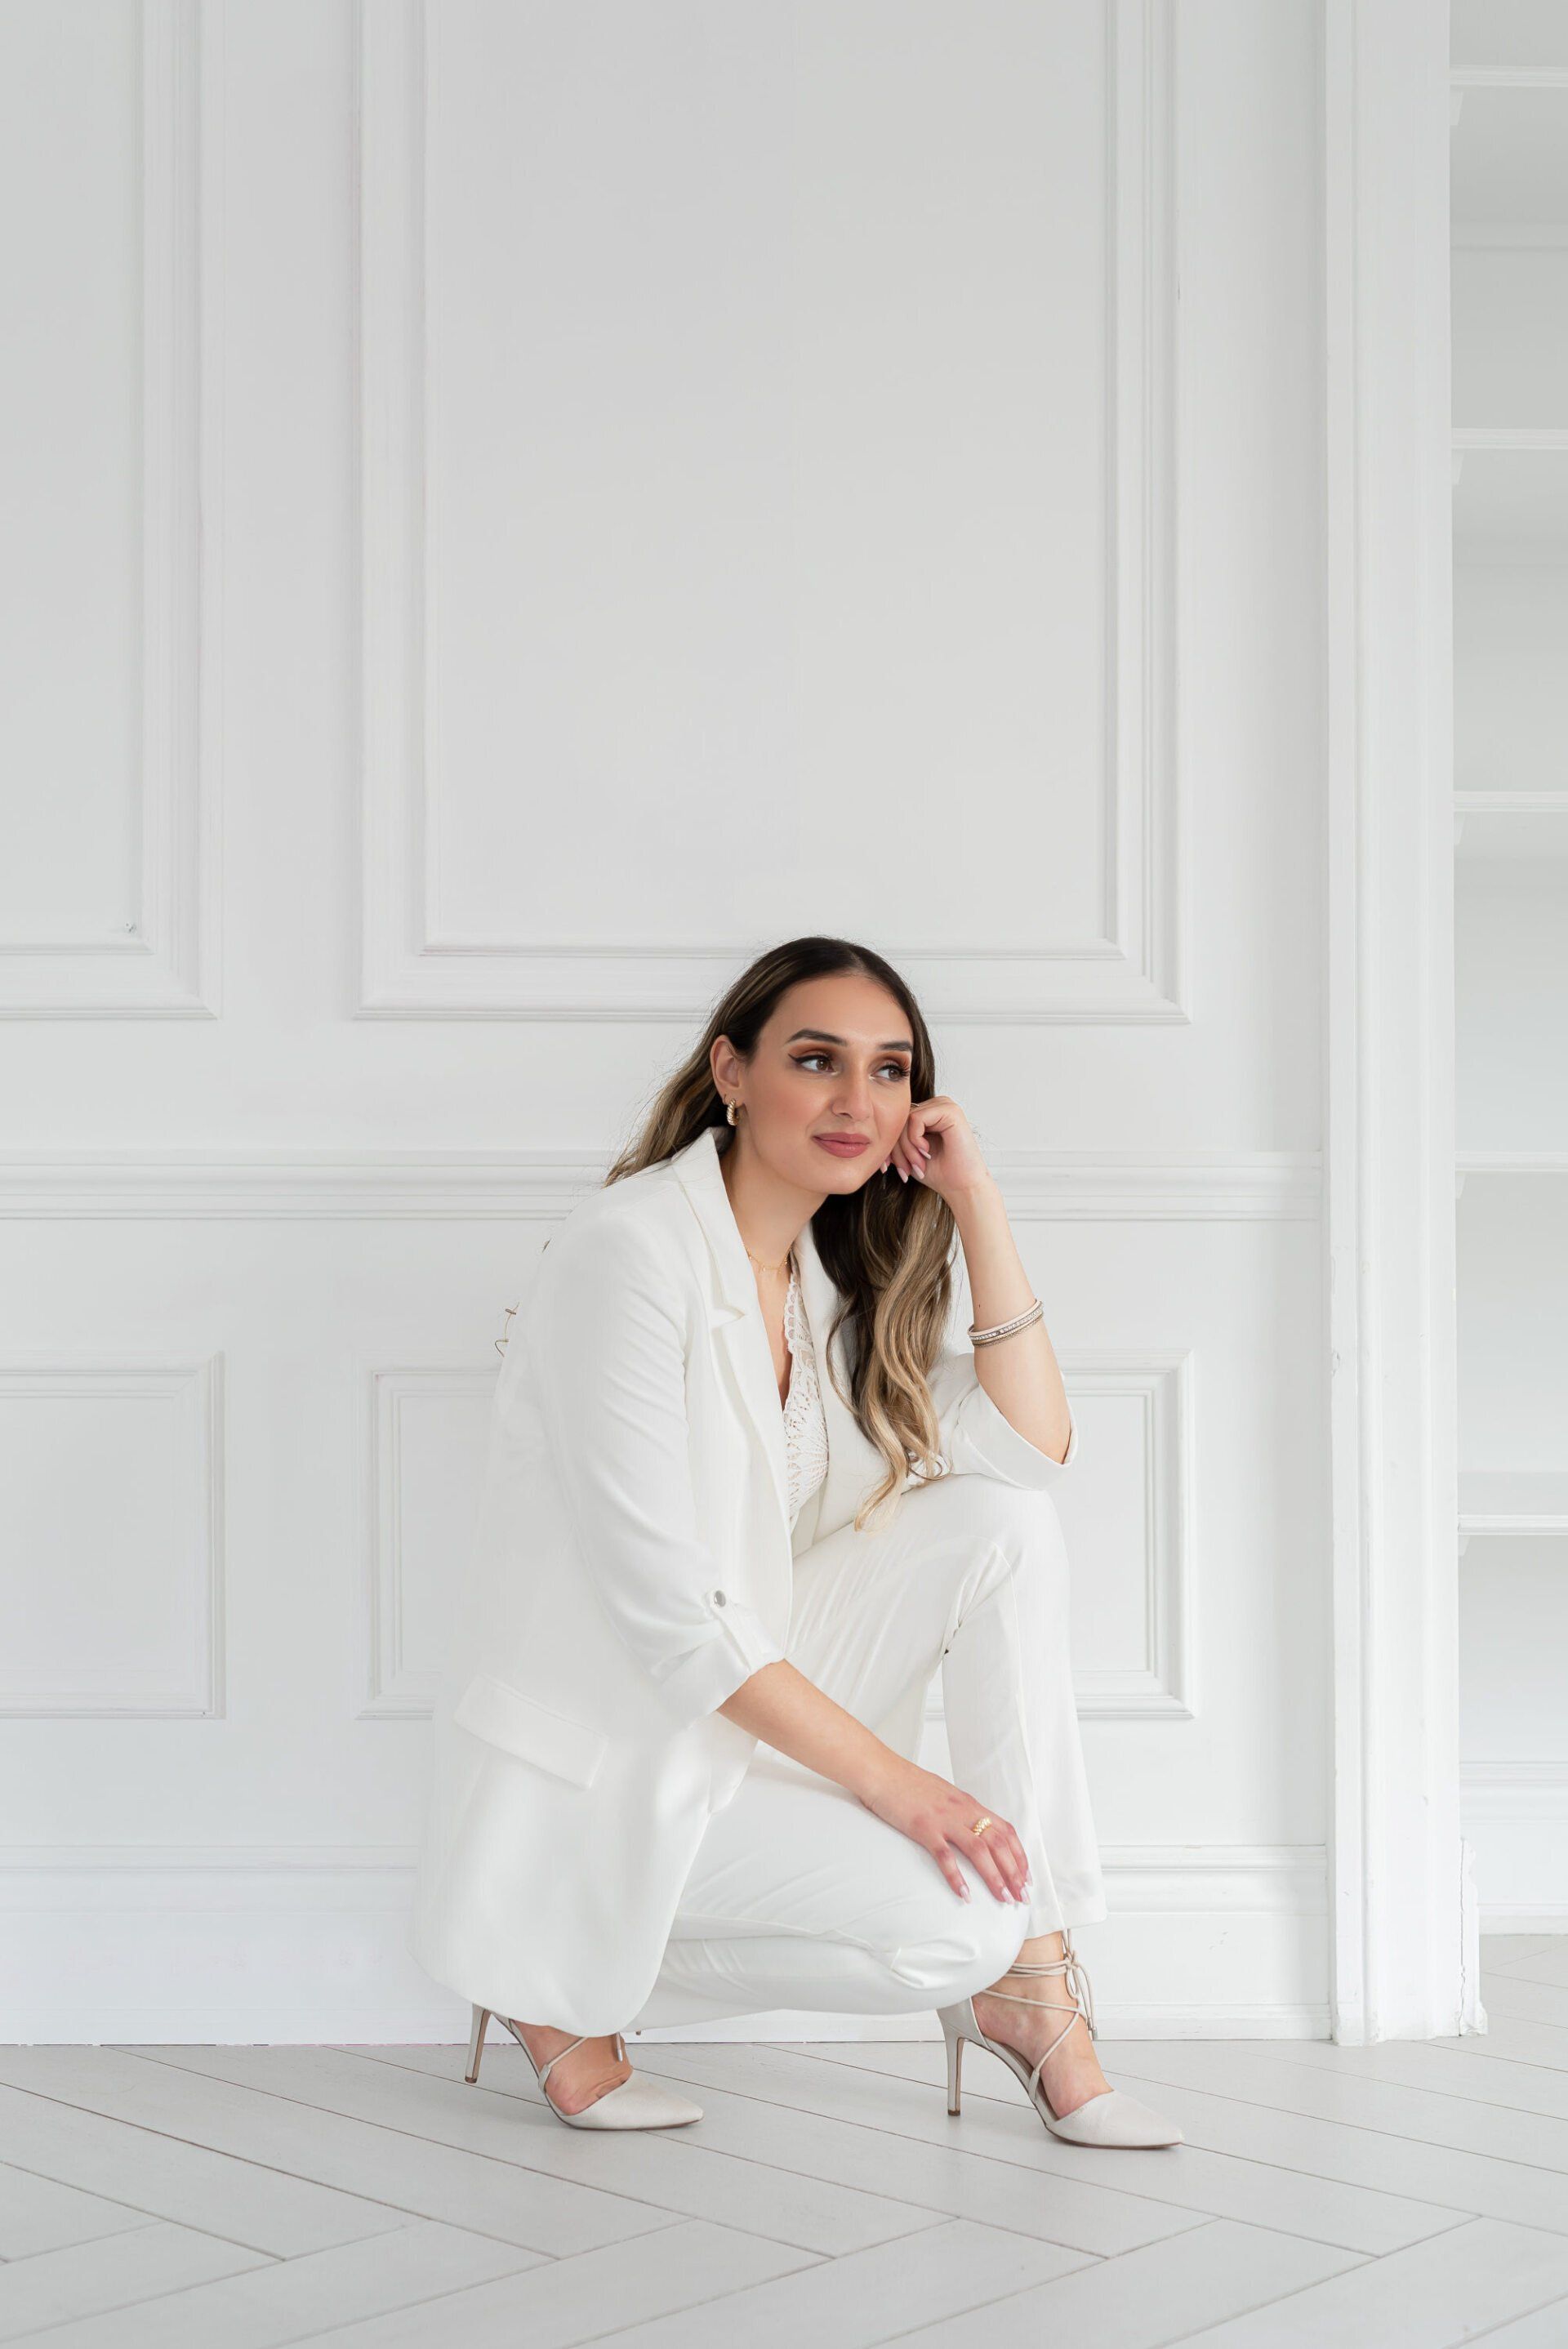 A young woman dressed in white crouches down in front of an all white wall.